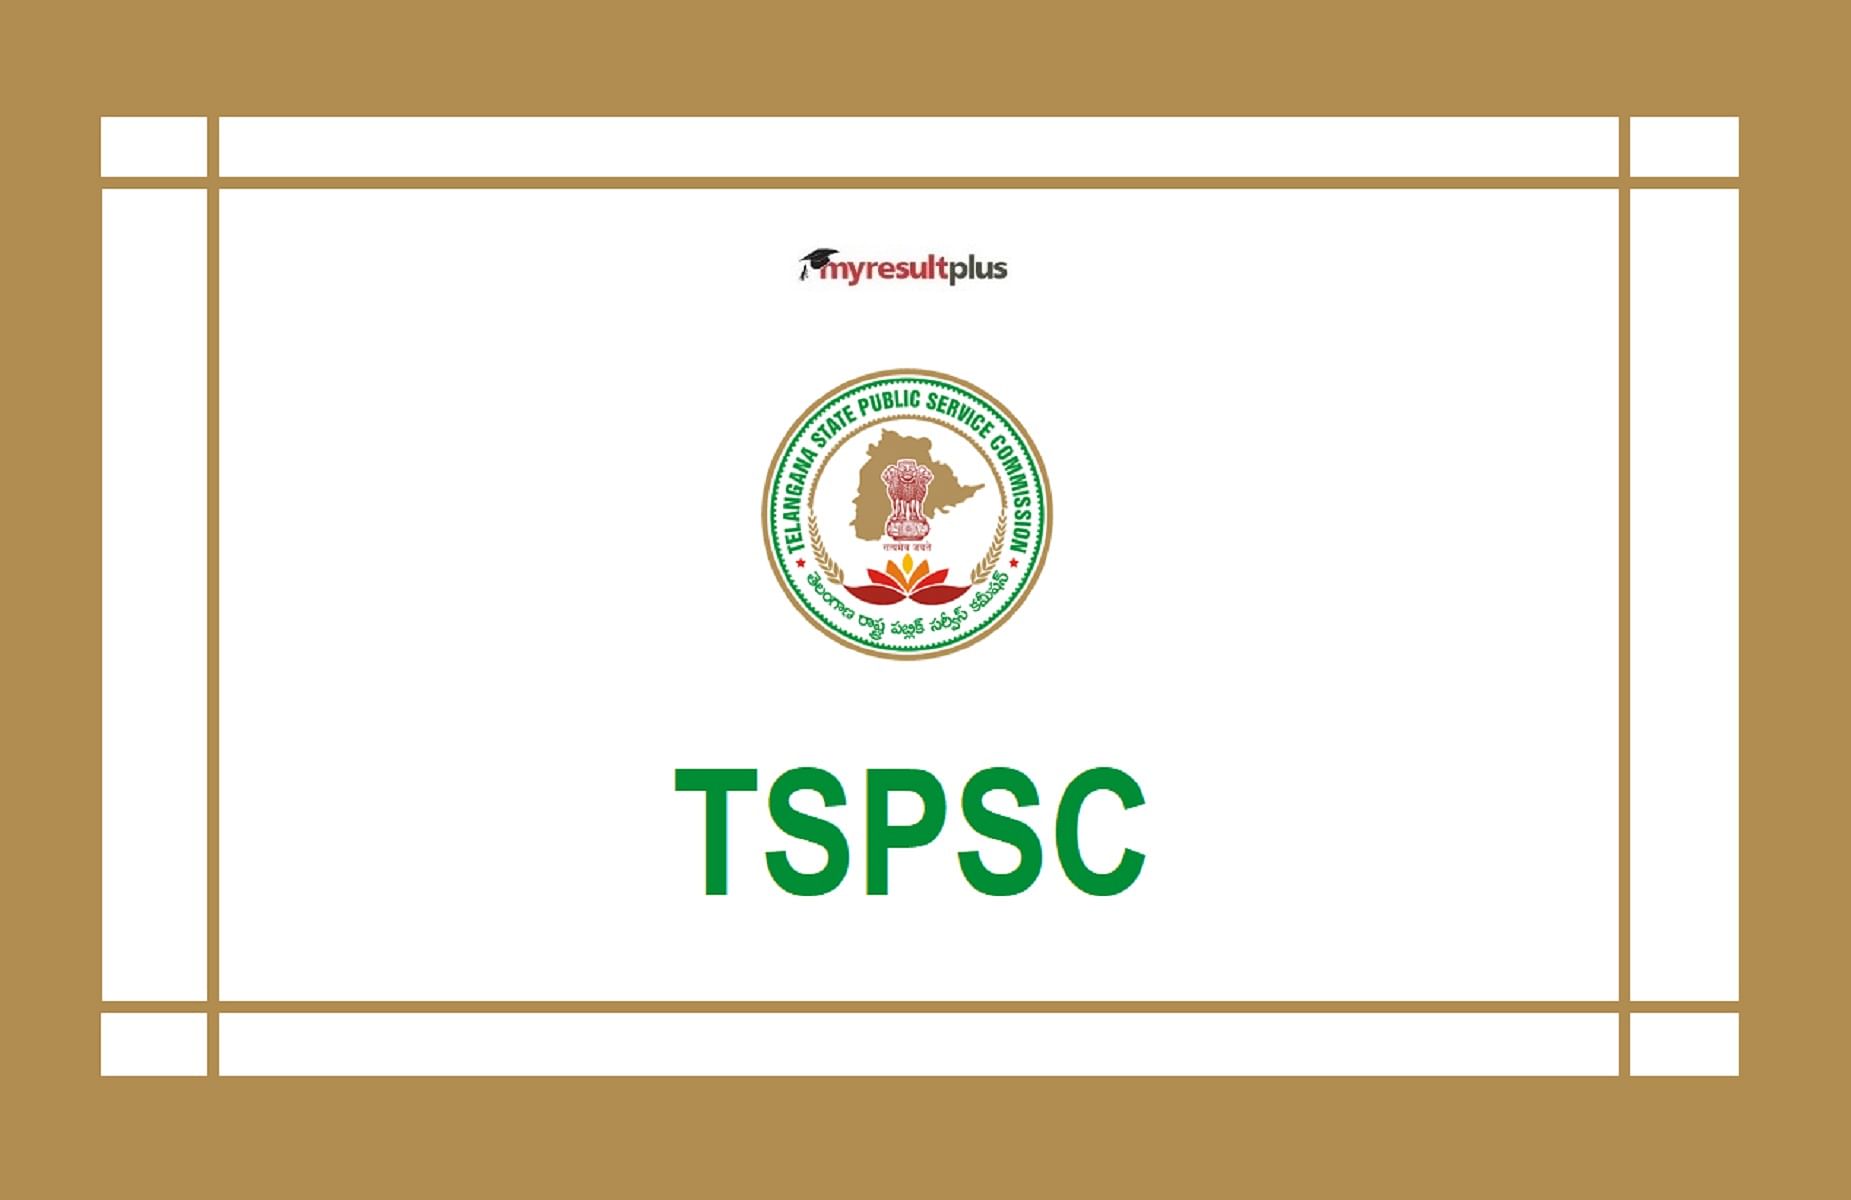 TSPSC Group 1 Exam 2022: Registrations Invited for 503 Officers Posts, Preliminary Exam Likely in June